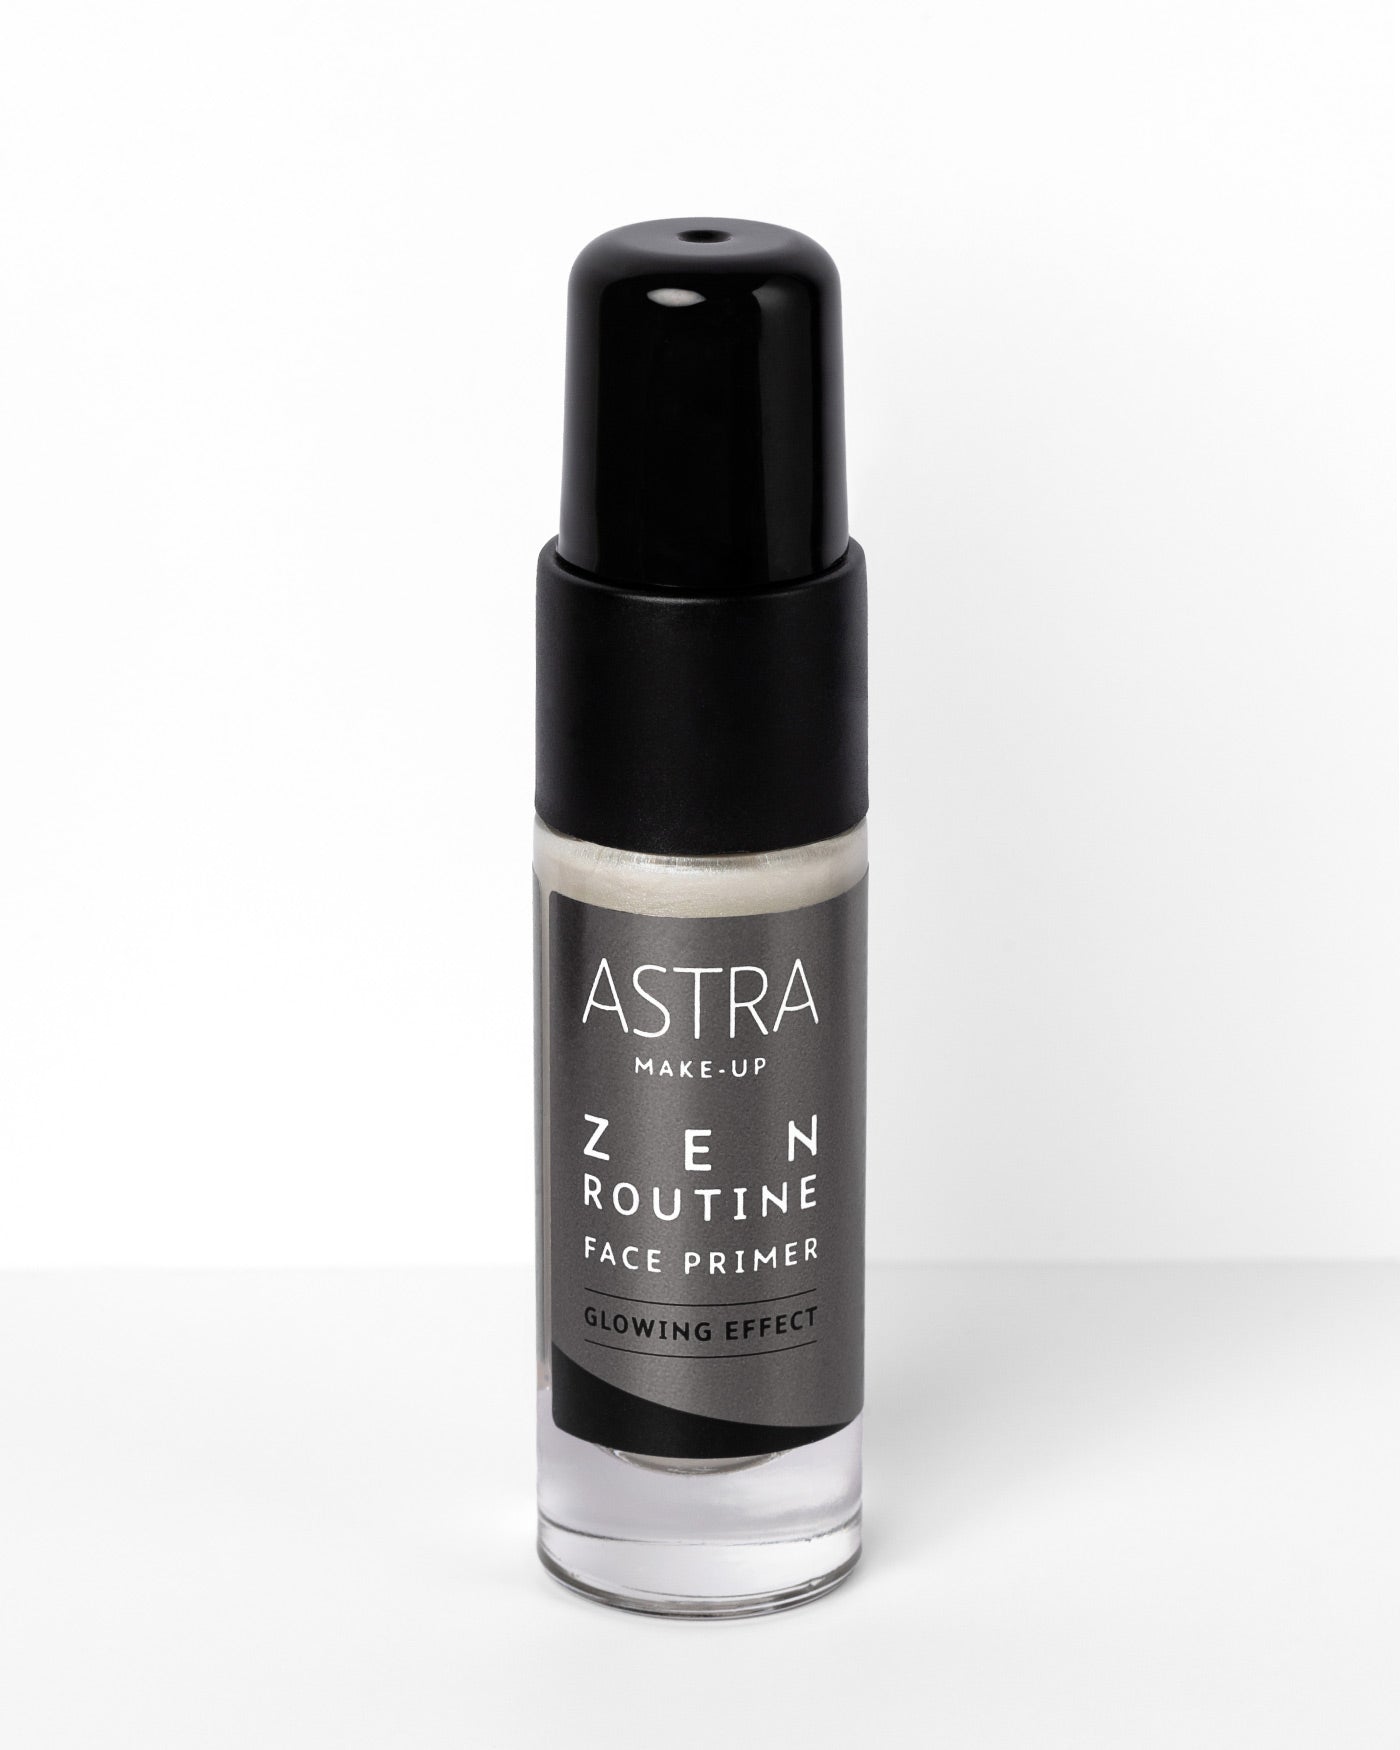 ZEN ROUTINE FACE PRIMER GLOWING EFFECT - Primer & Fixing - Astra Make-Up